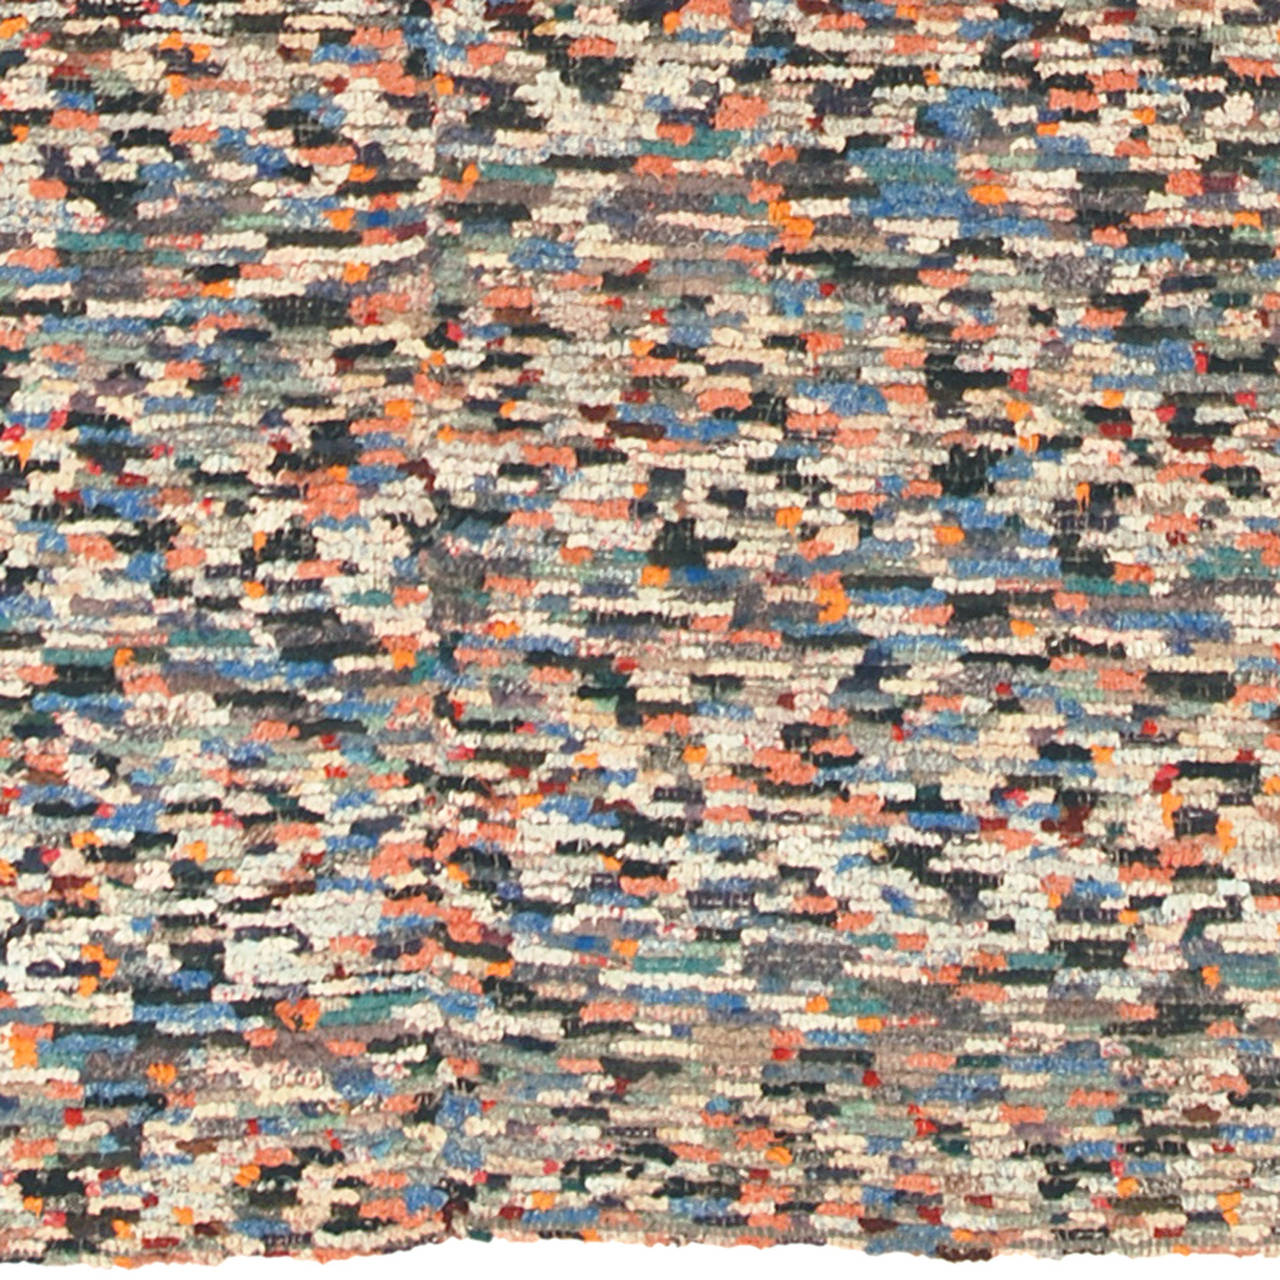 Mid 20th Century Swedish Flat-Weave Carpet by Ingeborg Berglof In Excellent Condition For Sale In New York, NY